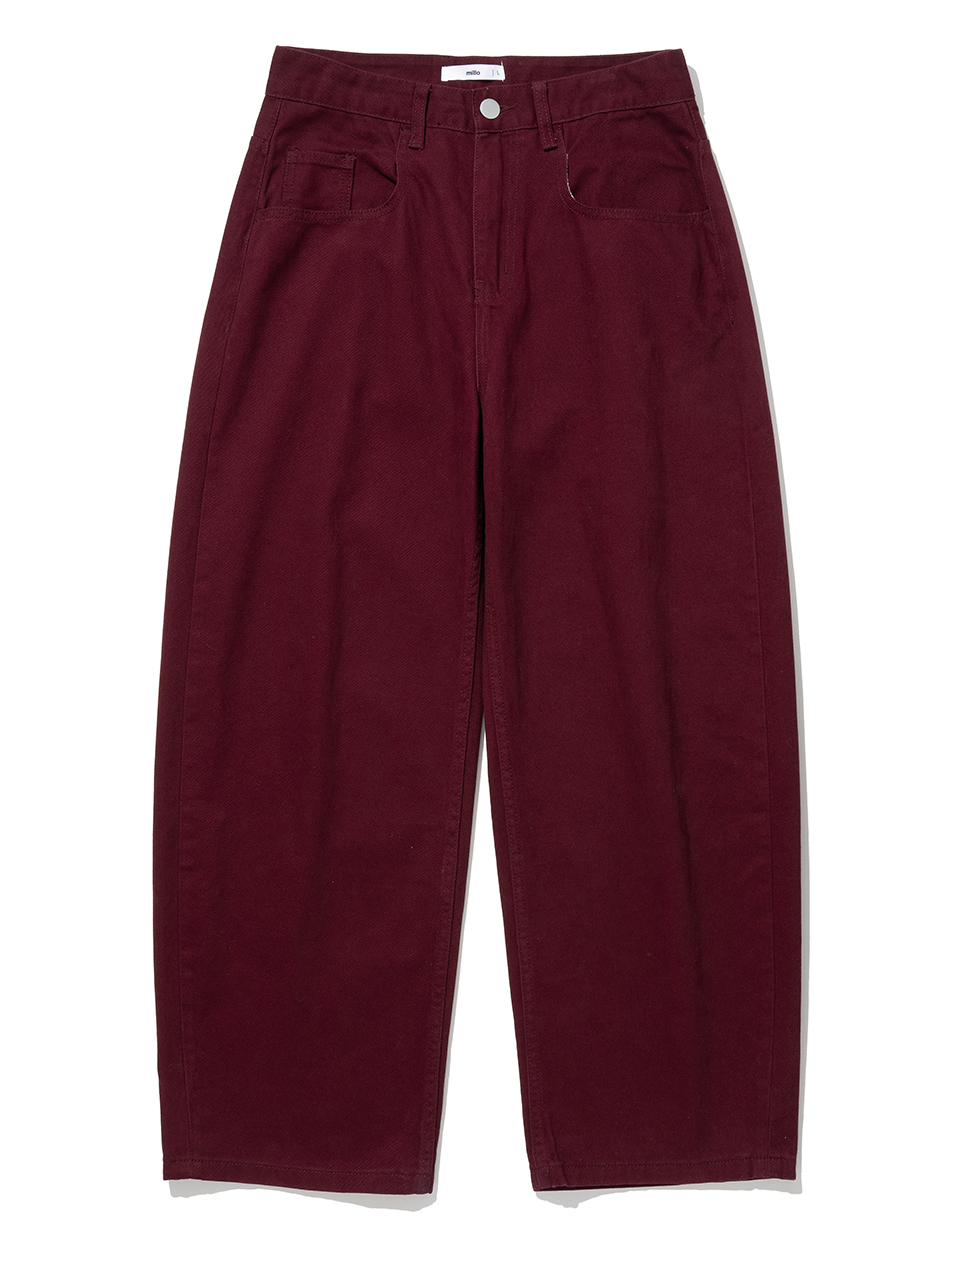 Reflect Curved Pants - Burgundy